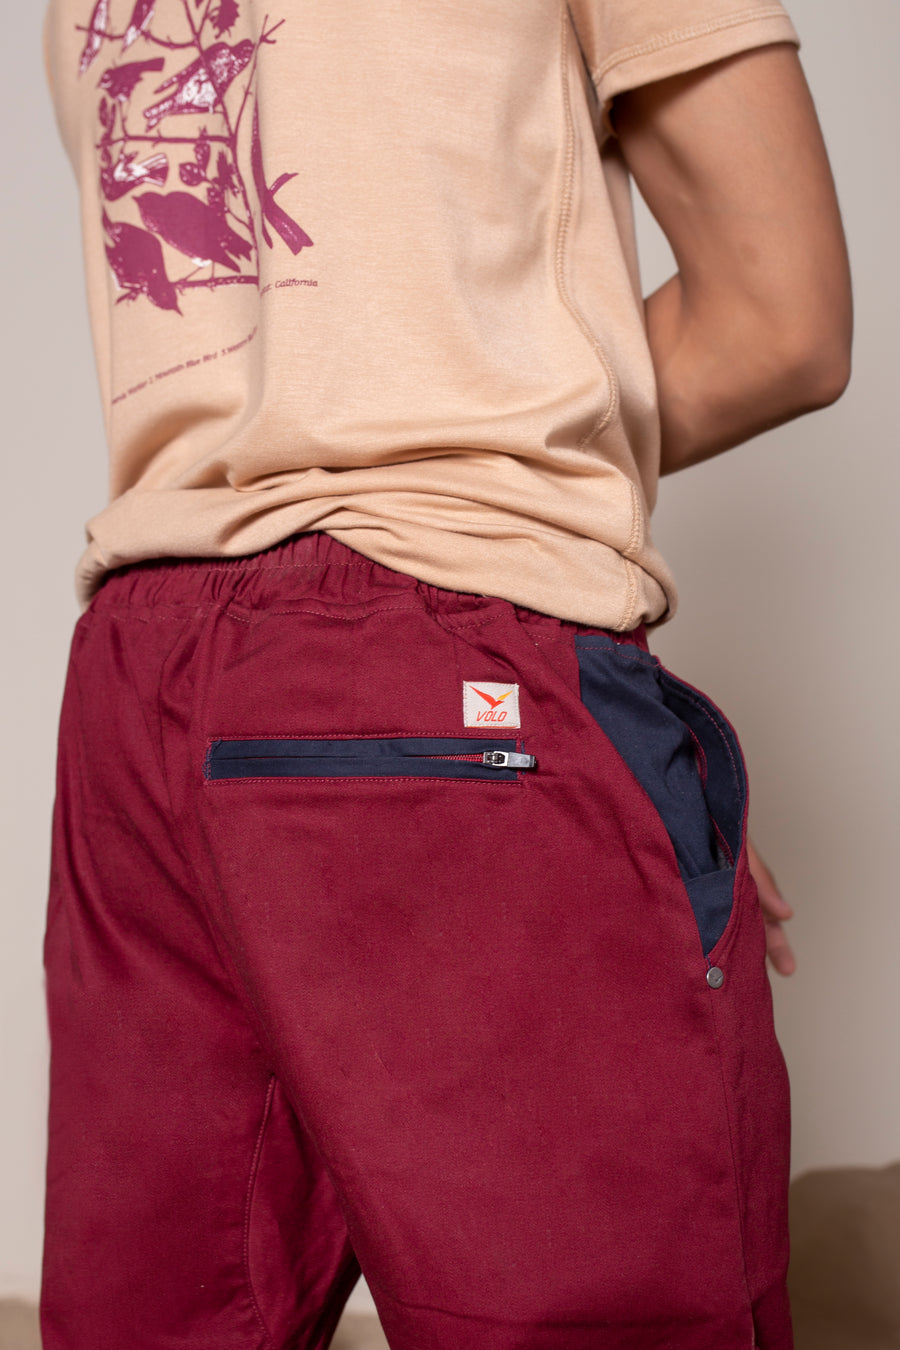 Men's Earth Joggers Jasper Red | VOLO Apparel | Designed for you to rock climb, hike, yoga, run or just chill. The most versatile athletic joggers that are fitted for your every daily life and all your athletic endeavors. The Earth Joggers comes with five pockets, features a 3 point gusset, 2 zipper pockets, snap buttons, tapered bottoms, and a breathable stretchy spandex cotton twill. With an internal drawstring and a tailored fit, these are gonna be your go to adventure joggers.